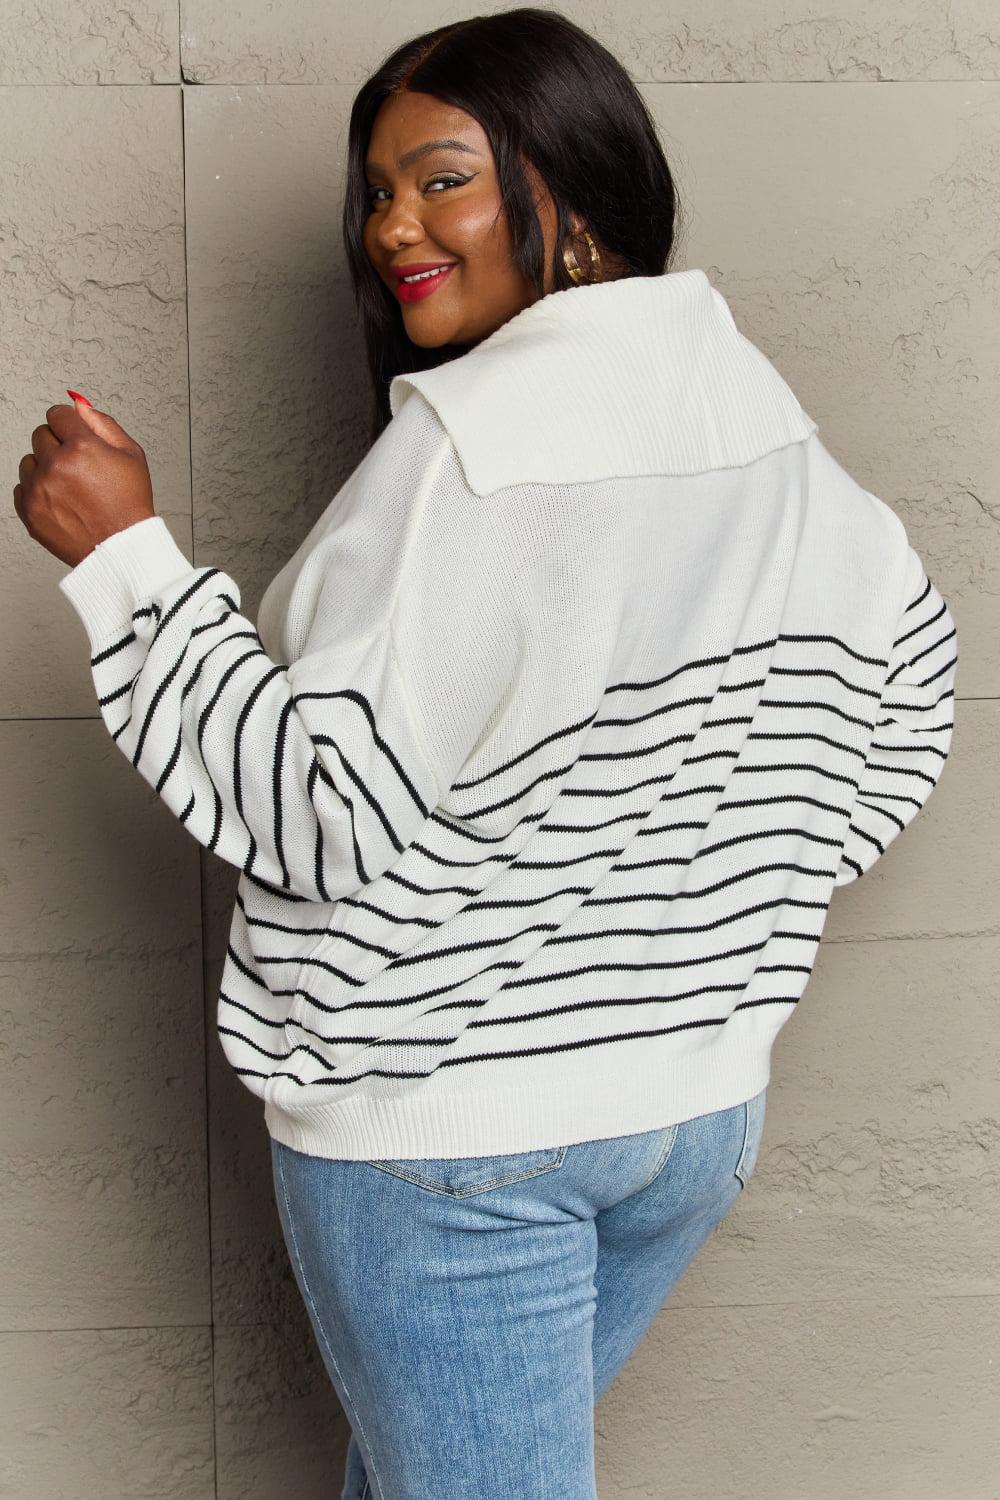 Sew In Love Make Me Smile Striped Oversized Knit Top BLUE ZONE PLANET